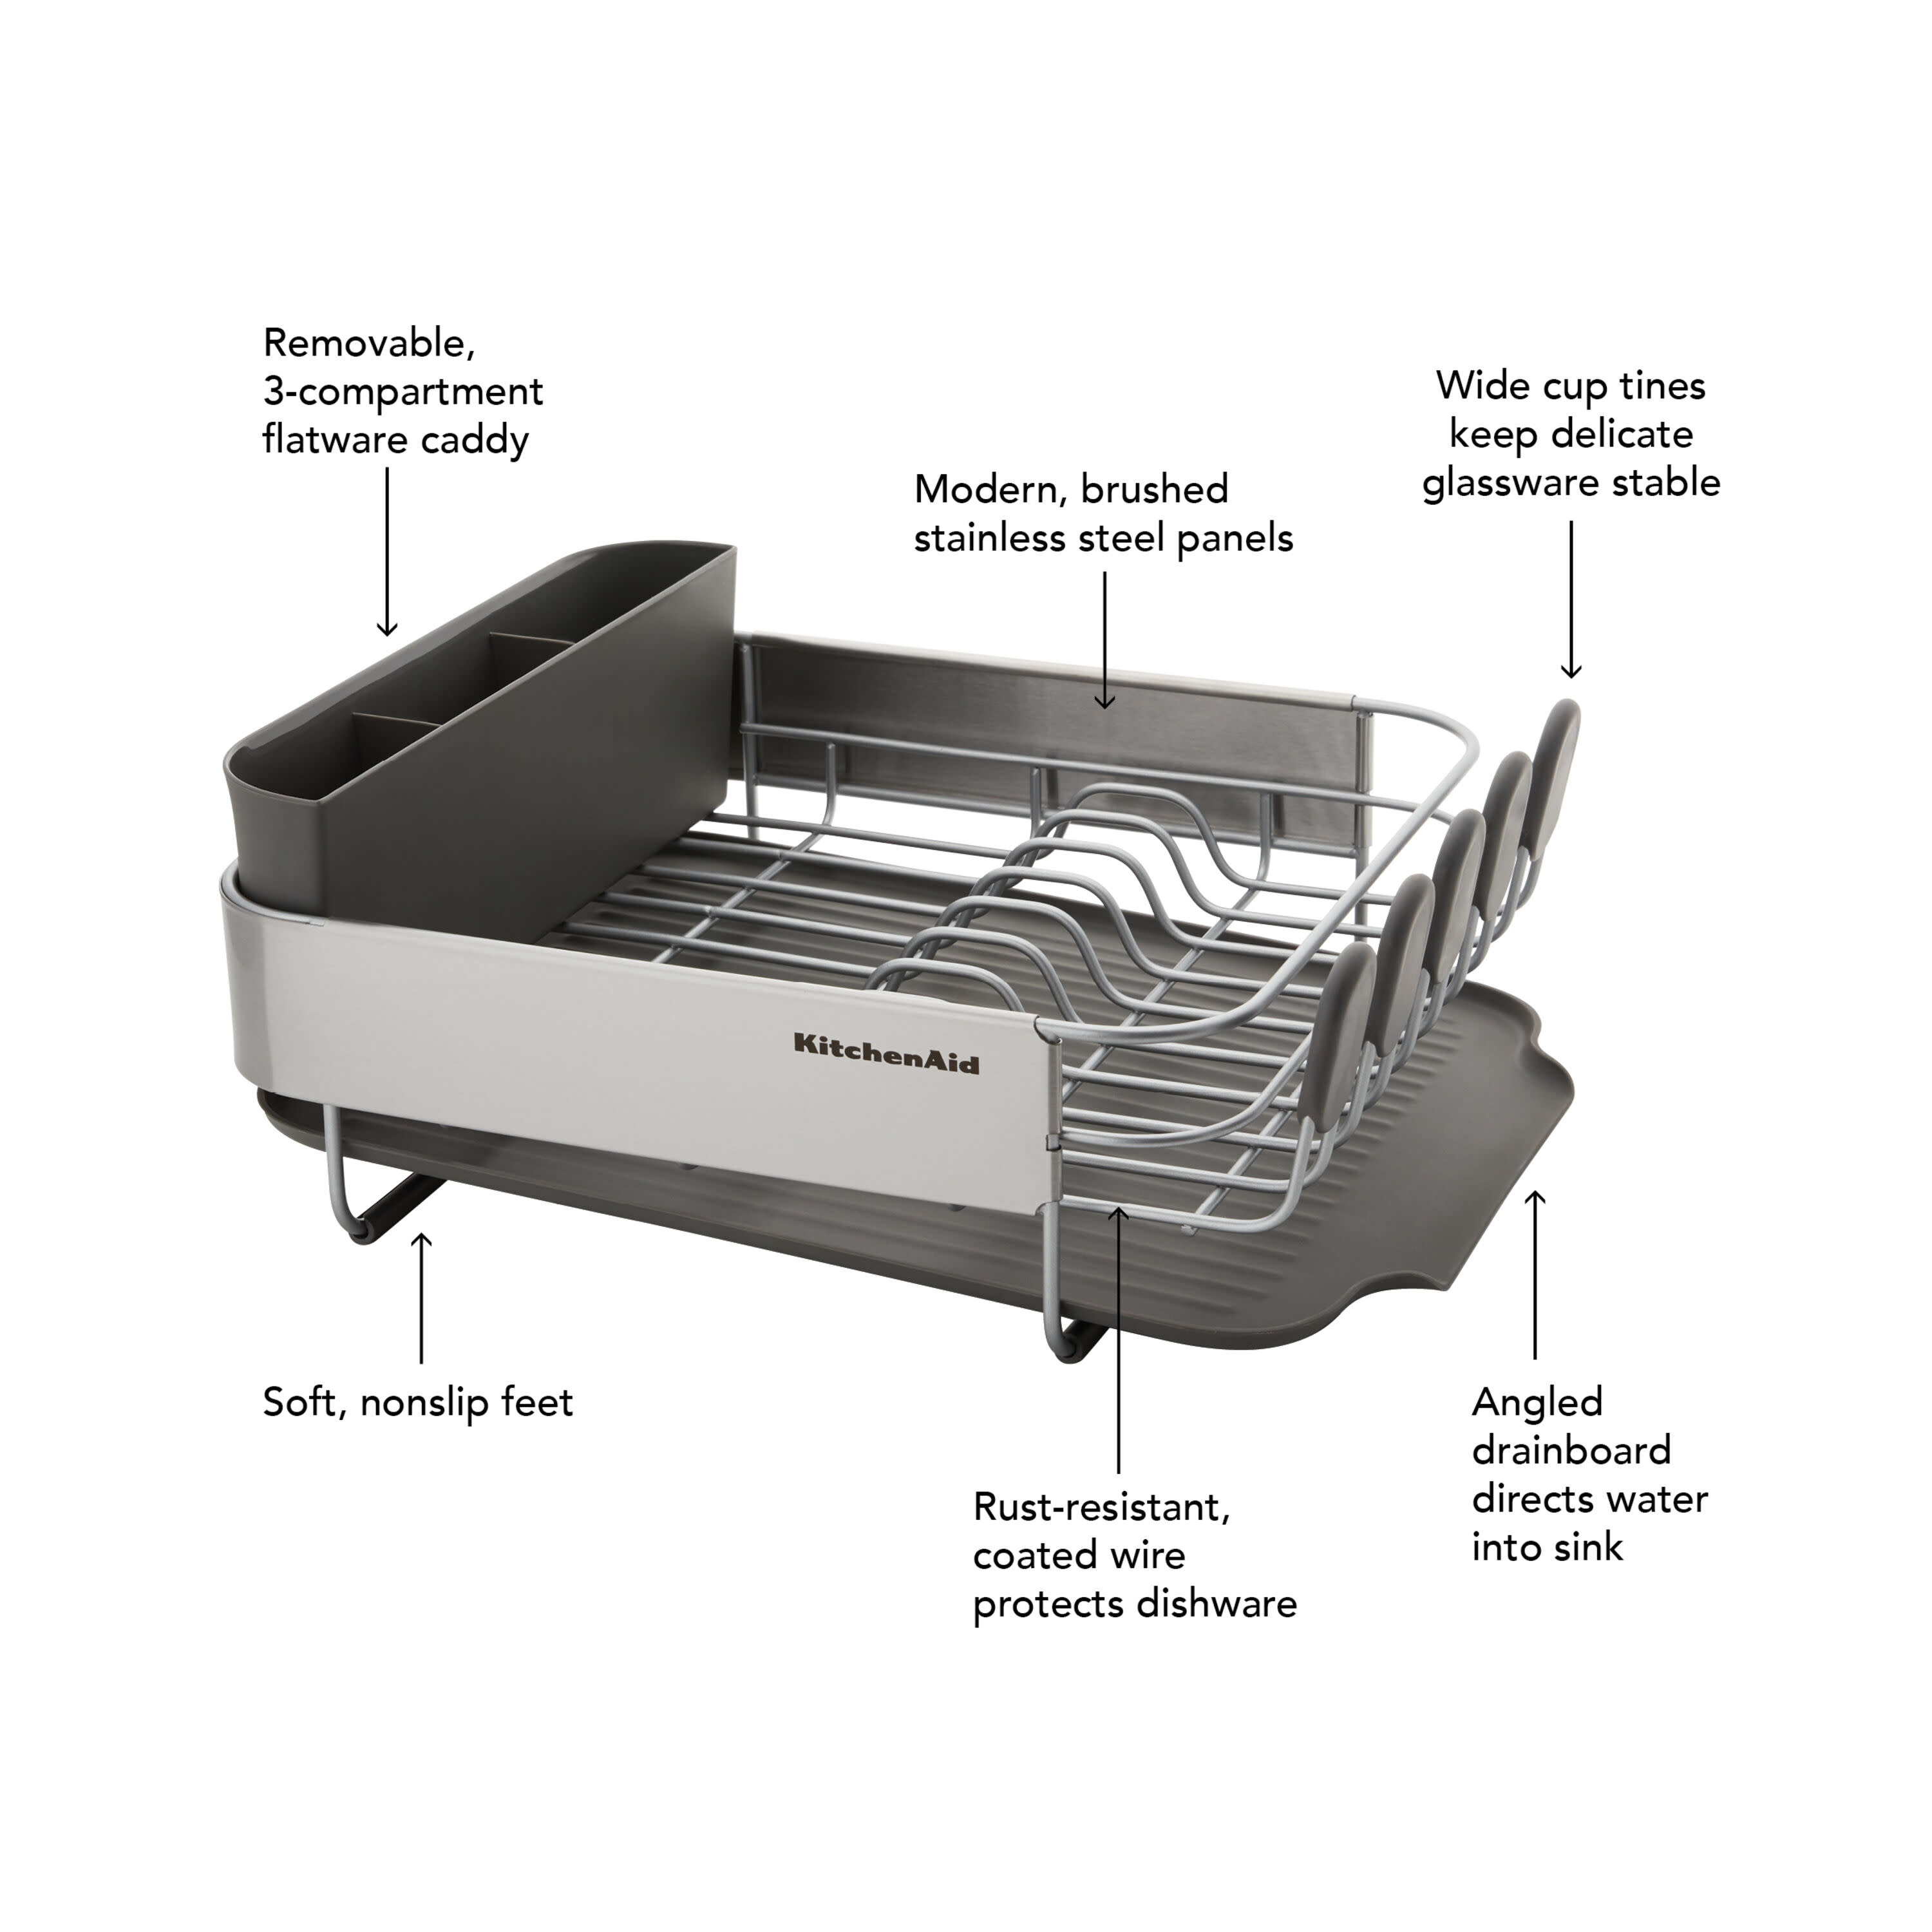 Kitchenaid Stainless Steel Wrap Compact Dish Rack in Satin Gray - image 8 of 9